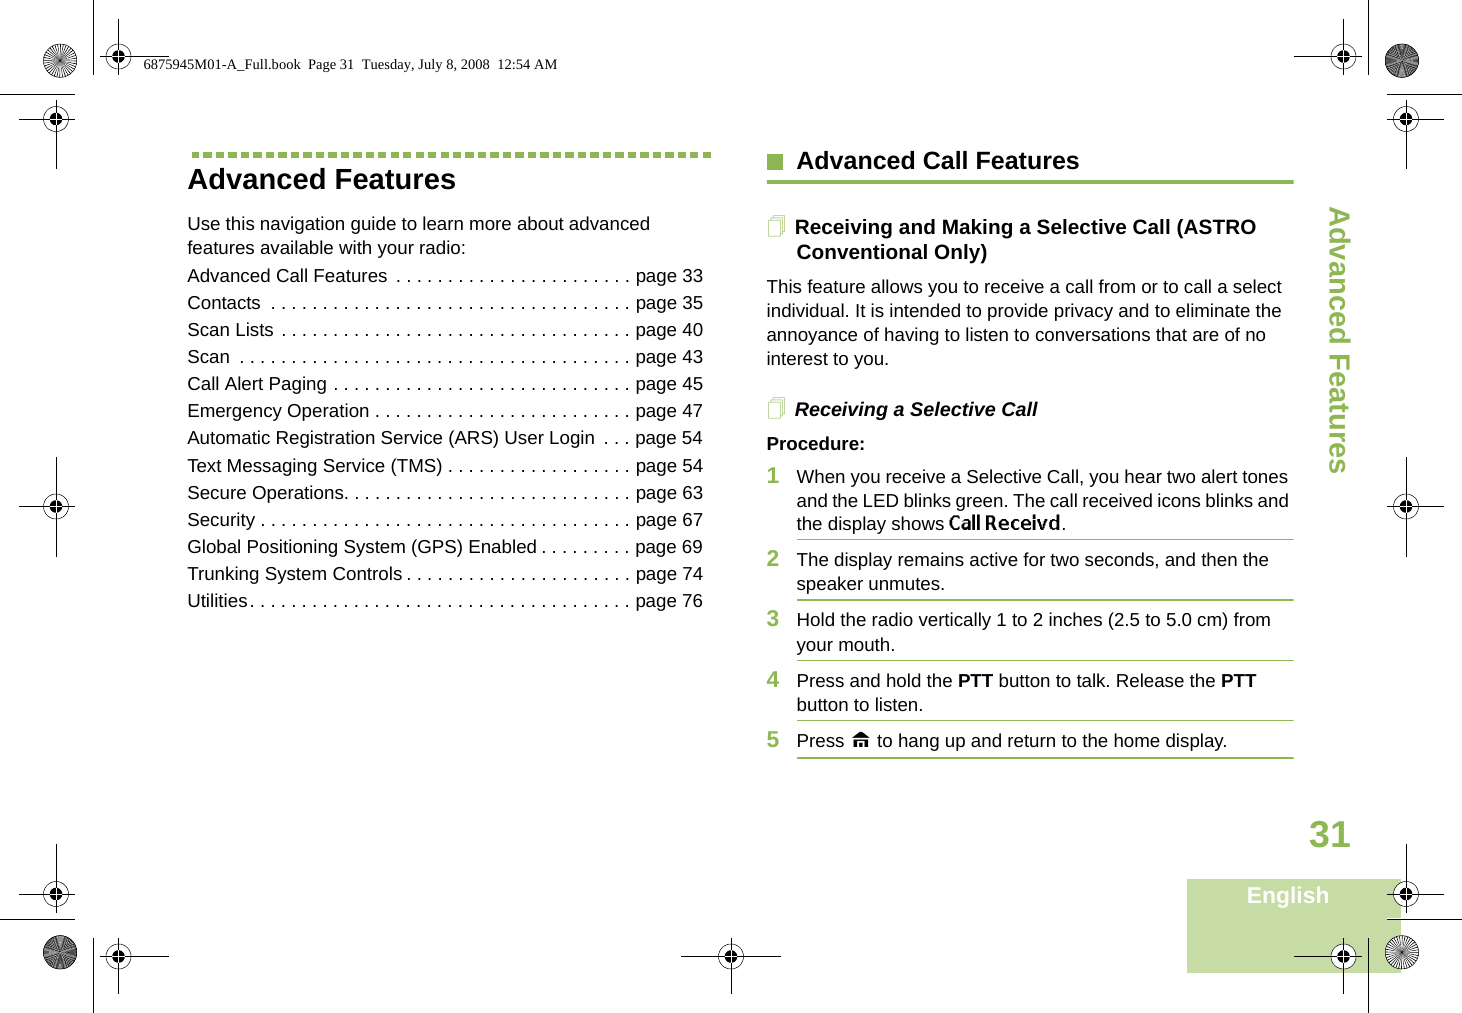 Advanced FeaturesEnglish31Advanced FeaturesUse this navigation guide to learn more about advanced features available with your radio:Advanced Call Features  . . . . . . . . . . . . . . . . . . . . . . . page 33Contacts  . . . . . . . . . . . . . . . . . . . . . . . . . . . . . . . . . . . page 35Scan Lists . . . . . . . . . . . . . . . . . . . . . . . . . . . . . . . . . . page 40Scan  . . . . . . . . . . . . . . . . . . . . . . . . . . . . . . . . . . . . . . page 43Call Alert Paging . . . . . . . . . . . . . . . . . . . . . . . . . . . . . page 45Emergency Operation . . . . . . . . . . . . . . . . . . . . . . . . . page 47Automatic Registration Service (ARS) User Login  . . . page 54Text Messaging Service (TMS) . . . . . . . . . . . . . . . . . . page 54Secure Operations. . . . . . . . . . . . . . . . . . . . . . . . . . . . page 63Security . . . . . . . . . . . . . . . . . . . . . . . . . . . . . . . . . . . . page 67Global Positioning System (GPS) Enabled . . . . . . . . . page 69Trunking System Controls . . . . . . . . . . . . . . . . . . . . . . page 74Utilities. . . . . . . . . . . . . . . . . . . . . . . . . . . . . . . . . . . . . page 76Advanced Call FeaturesReceiving and Making a Selective Call (ASTRO Conventional Only)This feature allows you to receive a call from or to call a select individual. It is intended to provide privacy and to eliminate the annoyance of having to listen to conversations that are of no interest to you.Receiving a Selective CallProcedure:1When you receive a Selective Call, you hear two alert tones and the LED blinks green. The call received icons blinks and the display shows Call Receivd.2The display remains active for two seconds, and then the speaker unmutes.3Hold the radio vertically 1 to 2 inches (2.5 to 5.0 cm) from your mouth.4Press and hold the PTT button to talk. Release the PTT button to listen.5Press H to hang up and return to the home display.6875945M01-A_Full.book  Page 31  Tuesday, July 8, 2008  12:54 AM